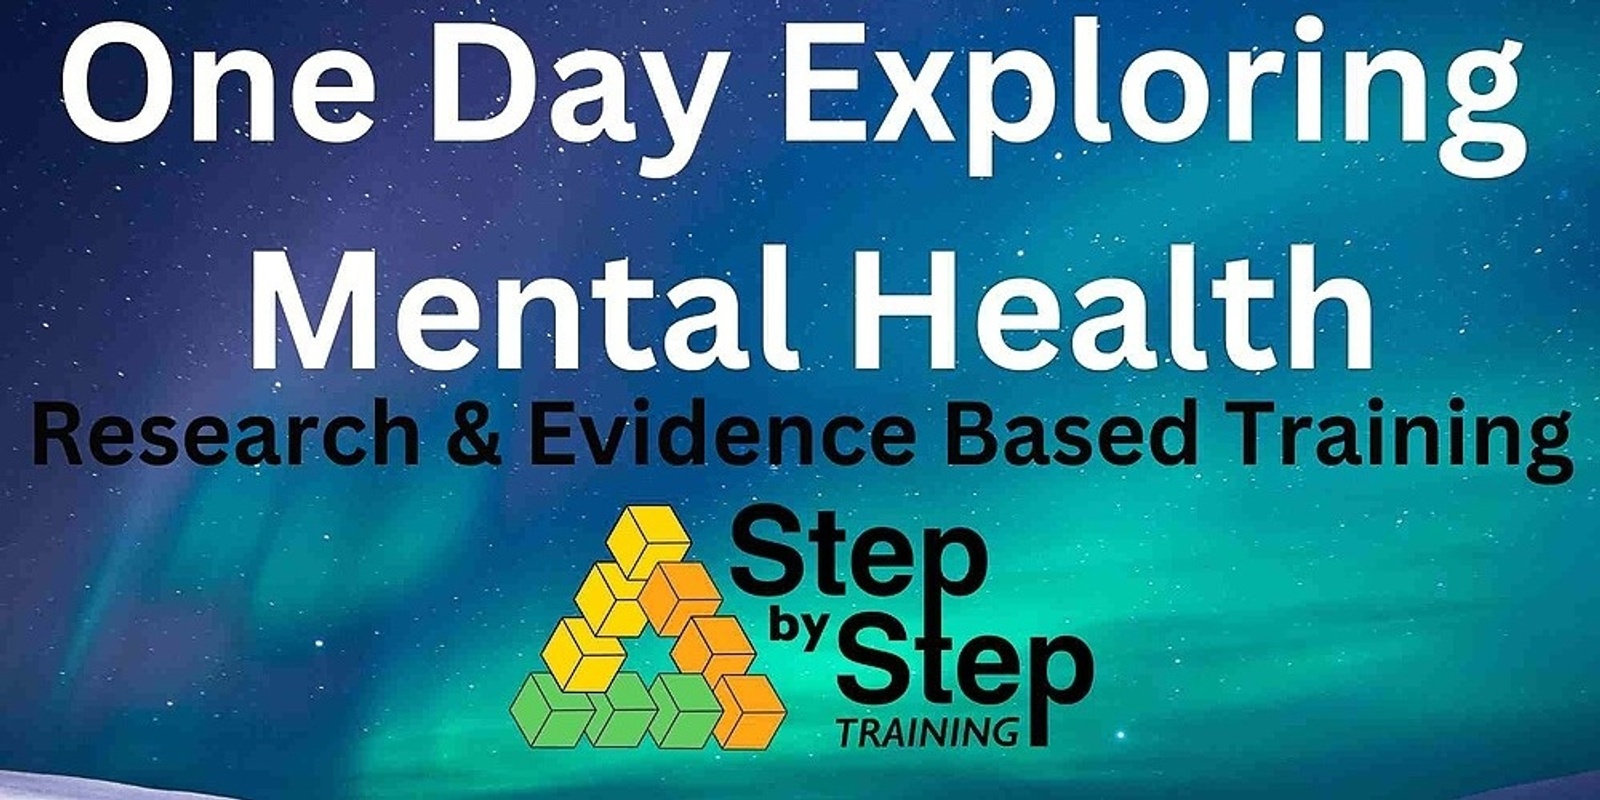 One Day Exploring Mental Health - Toowoomba 